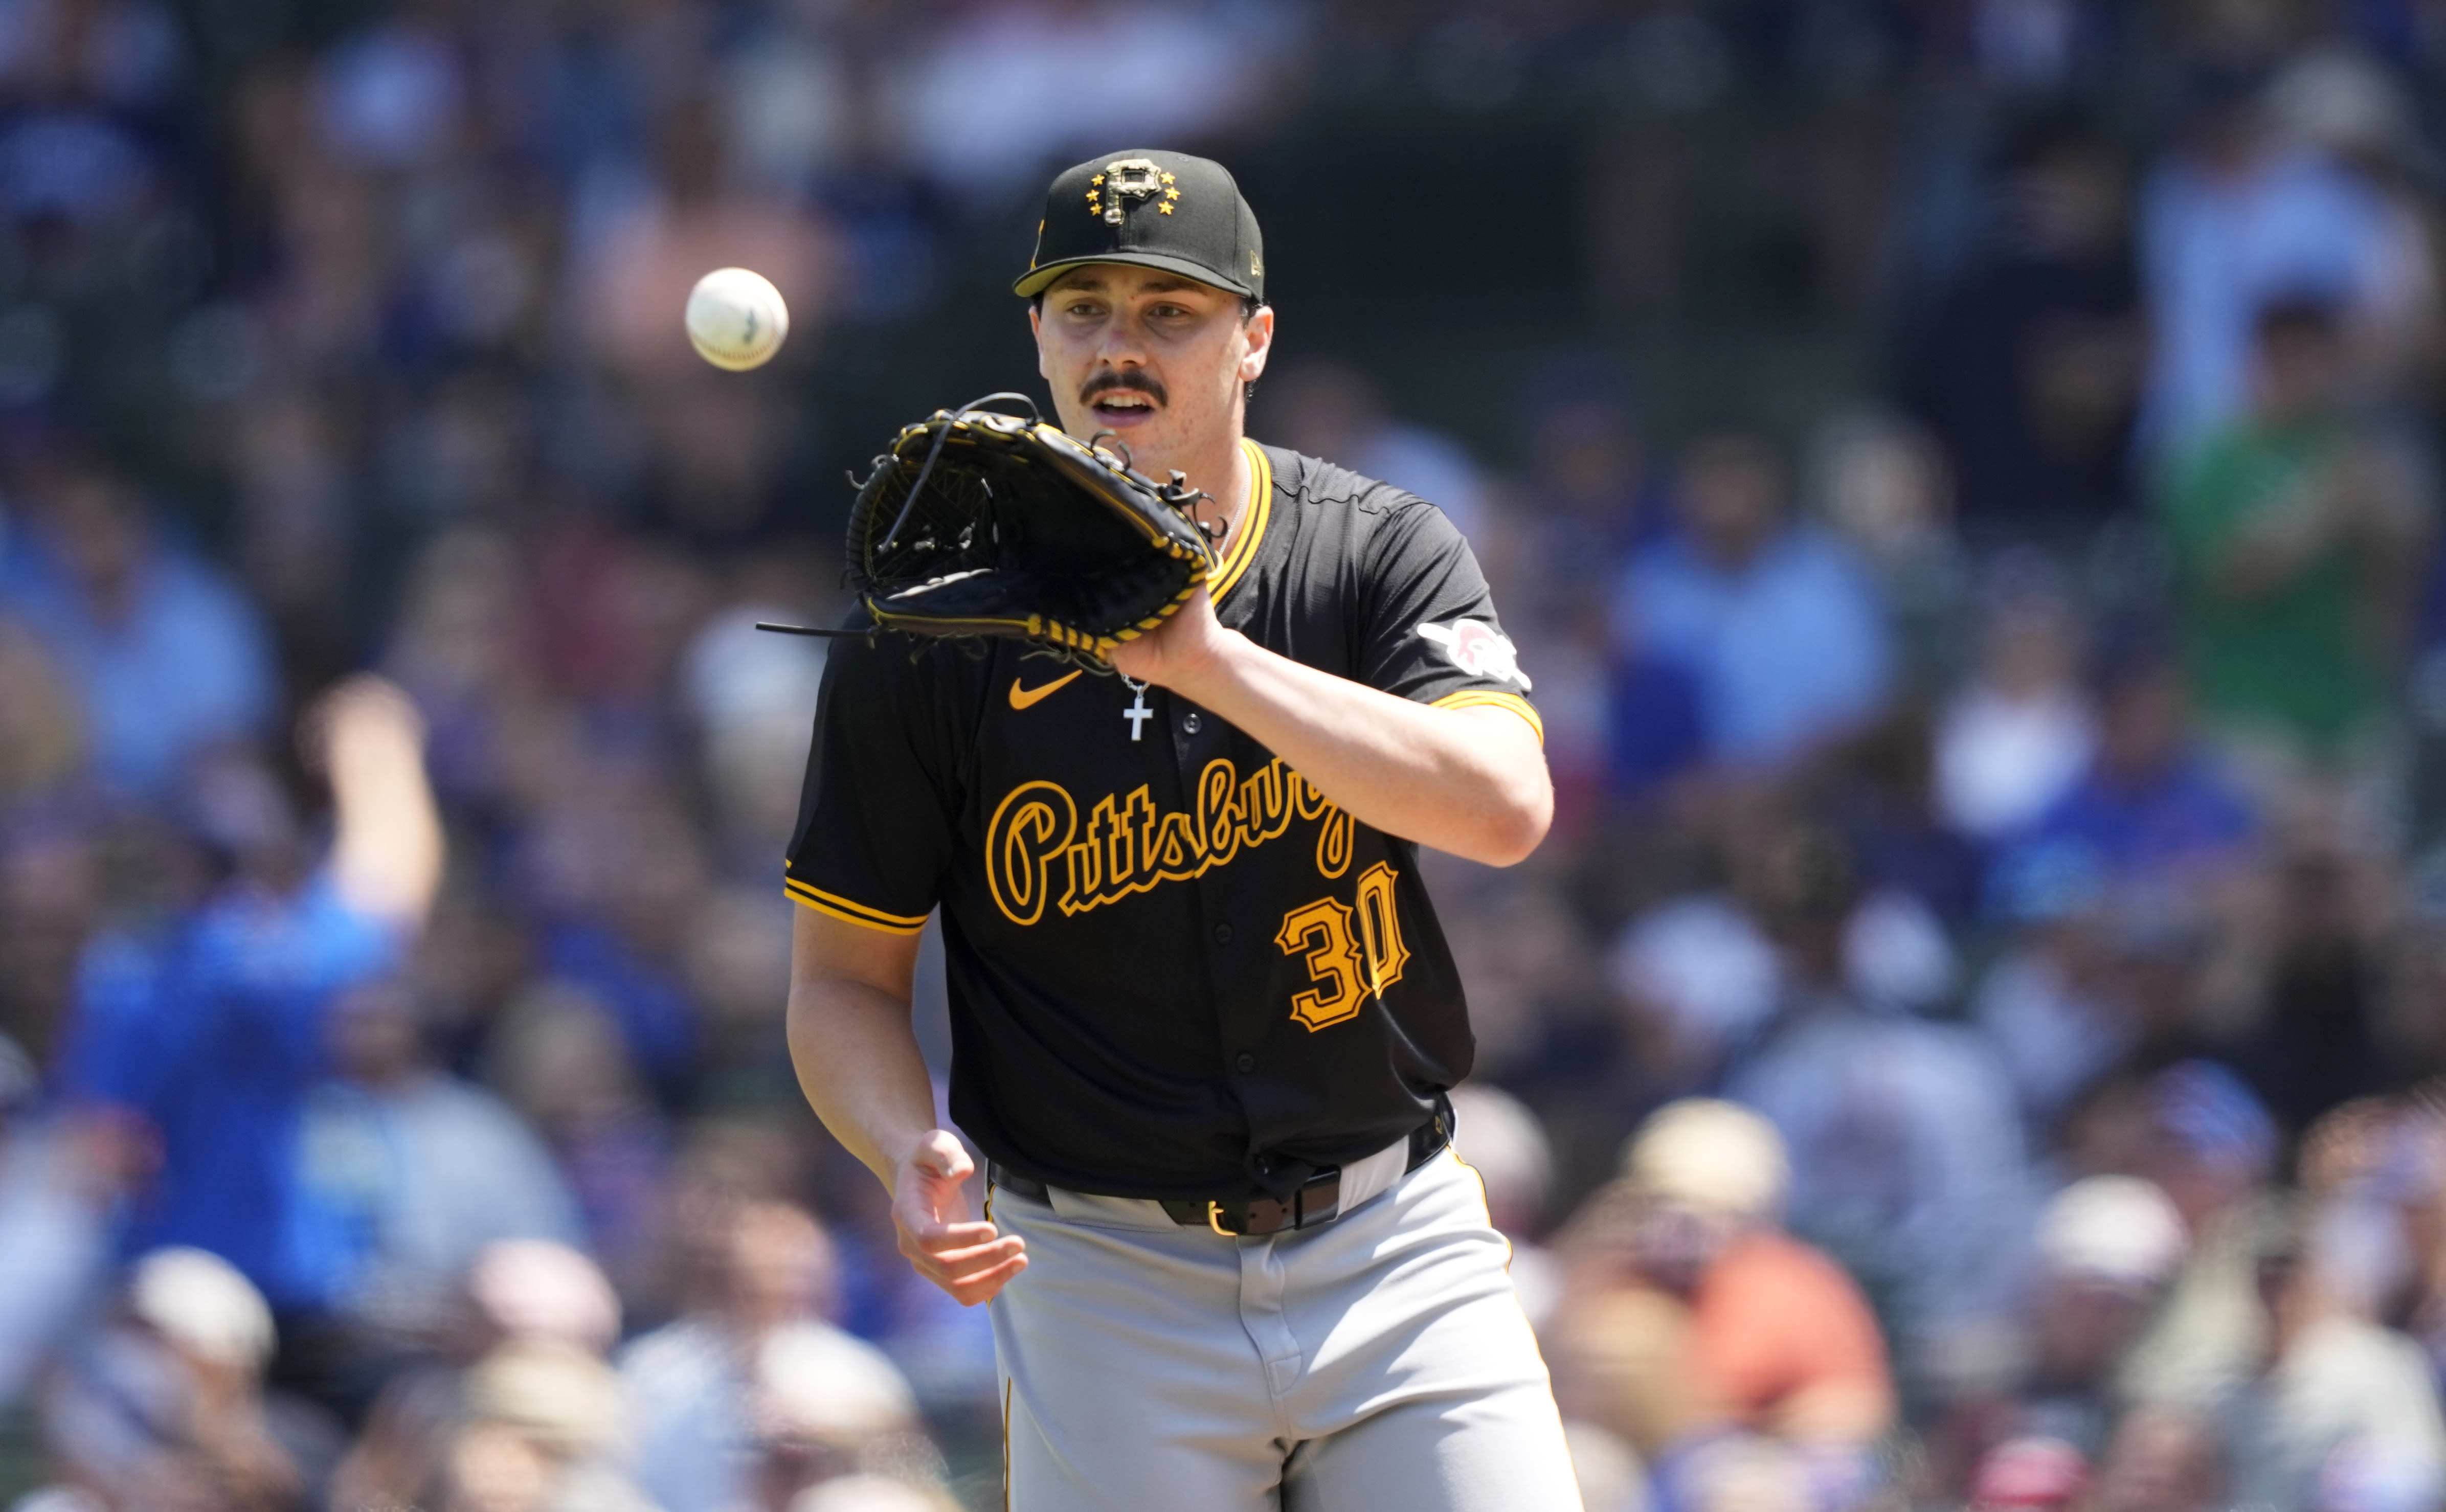 Pirates' Skenes pitches 6 no-hit innings before Morel singles for Cubs against reliever